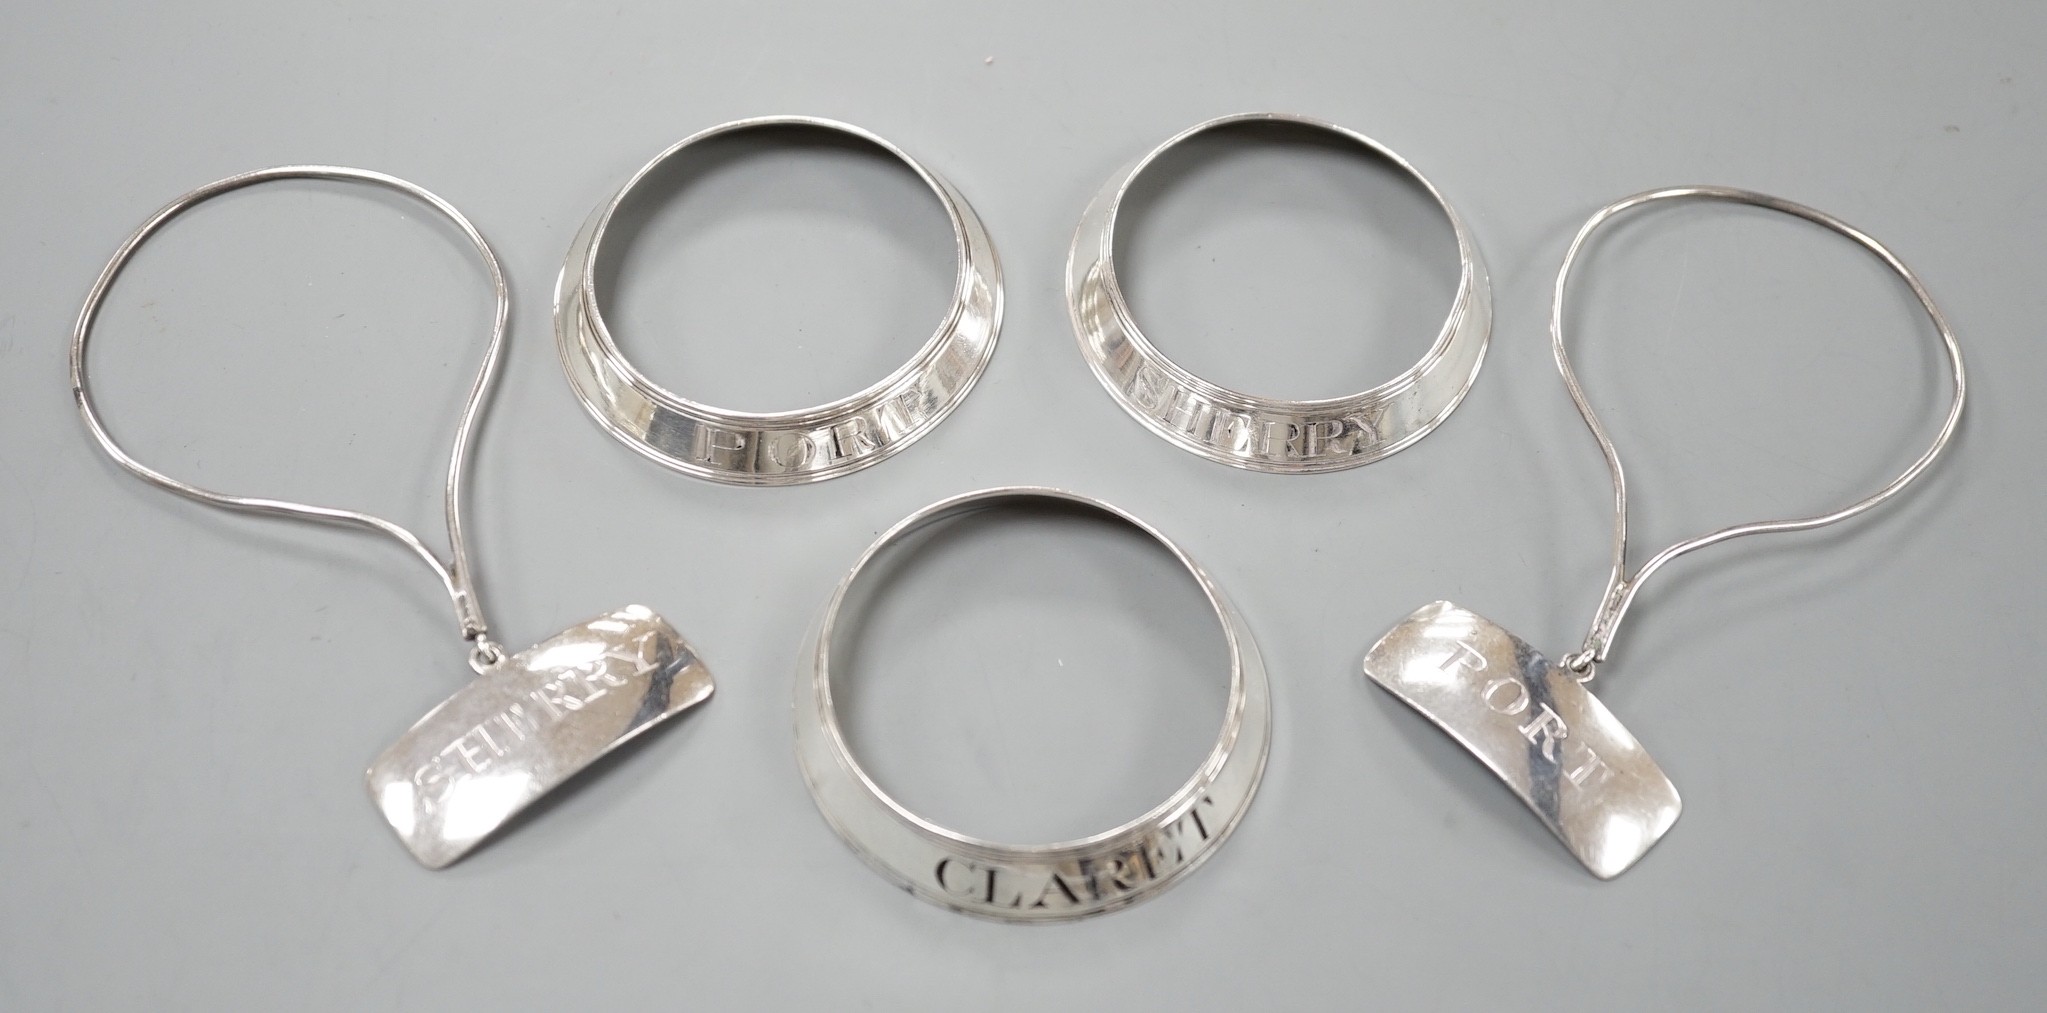 A set of three George silver decanted wine collar labels, Robert Barker, London, 1793 and a pair of similar silver wine label collarettes by Peter & Ann Bateman, London, 1798.                                             